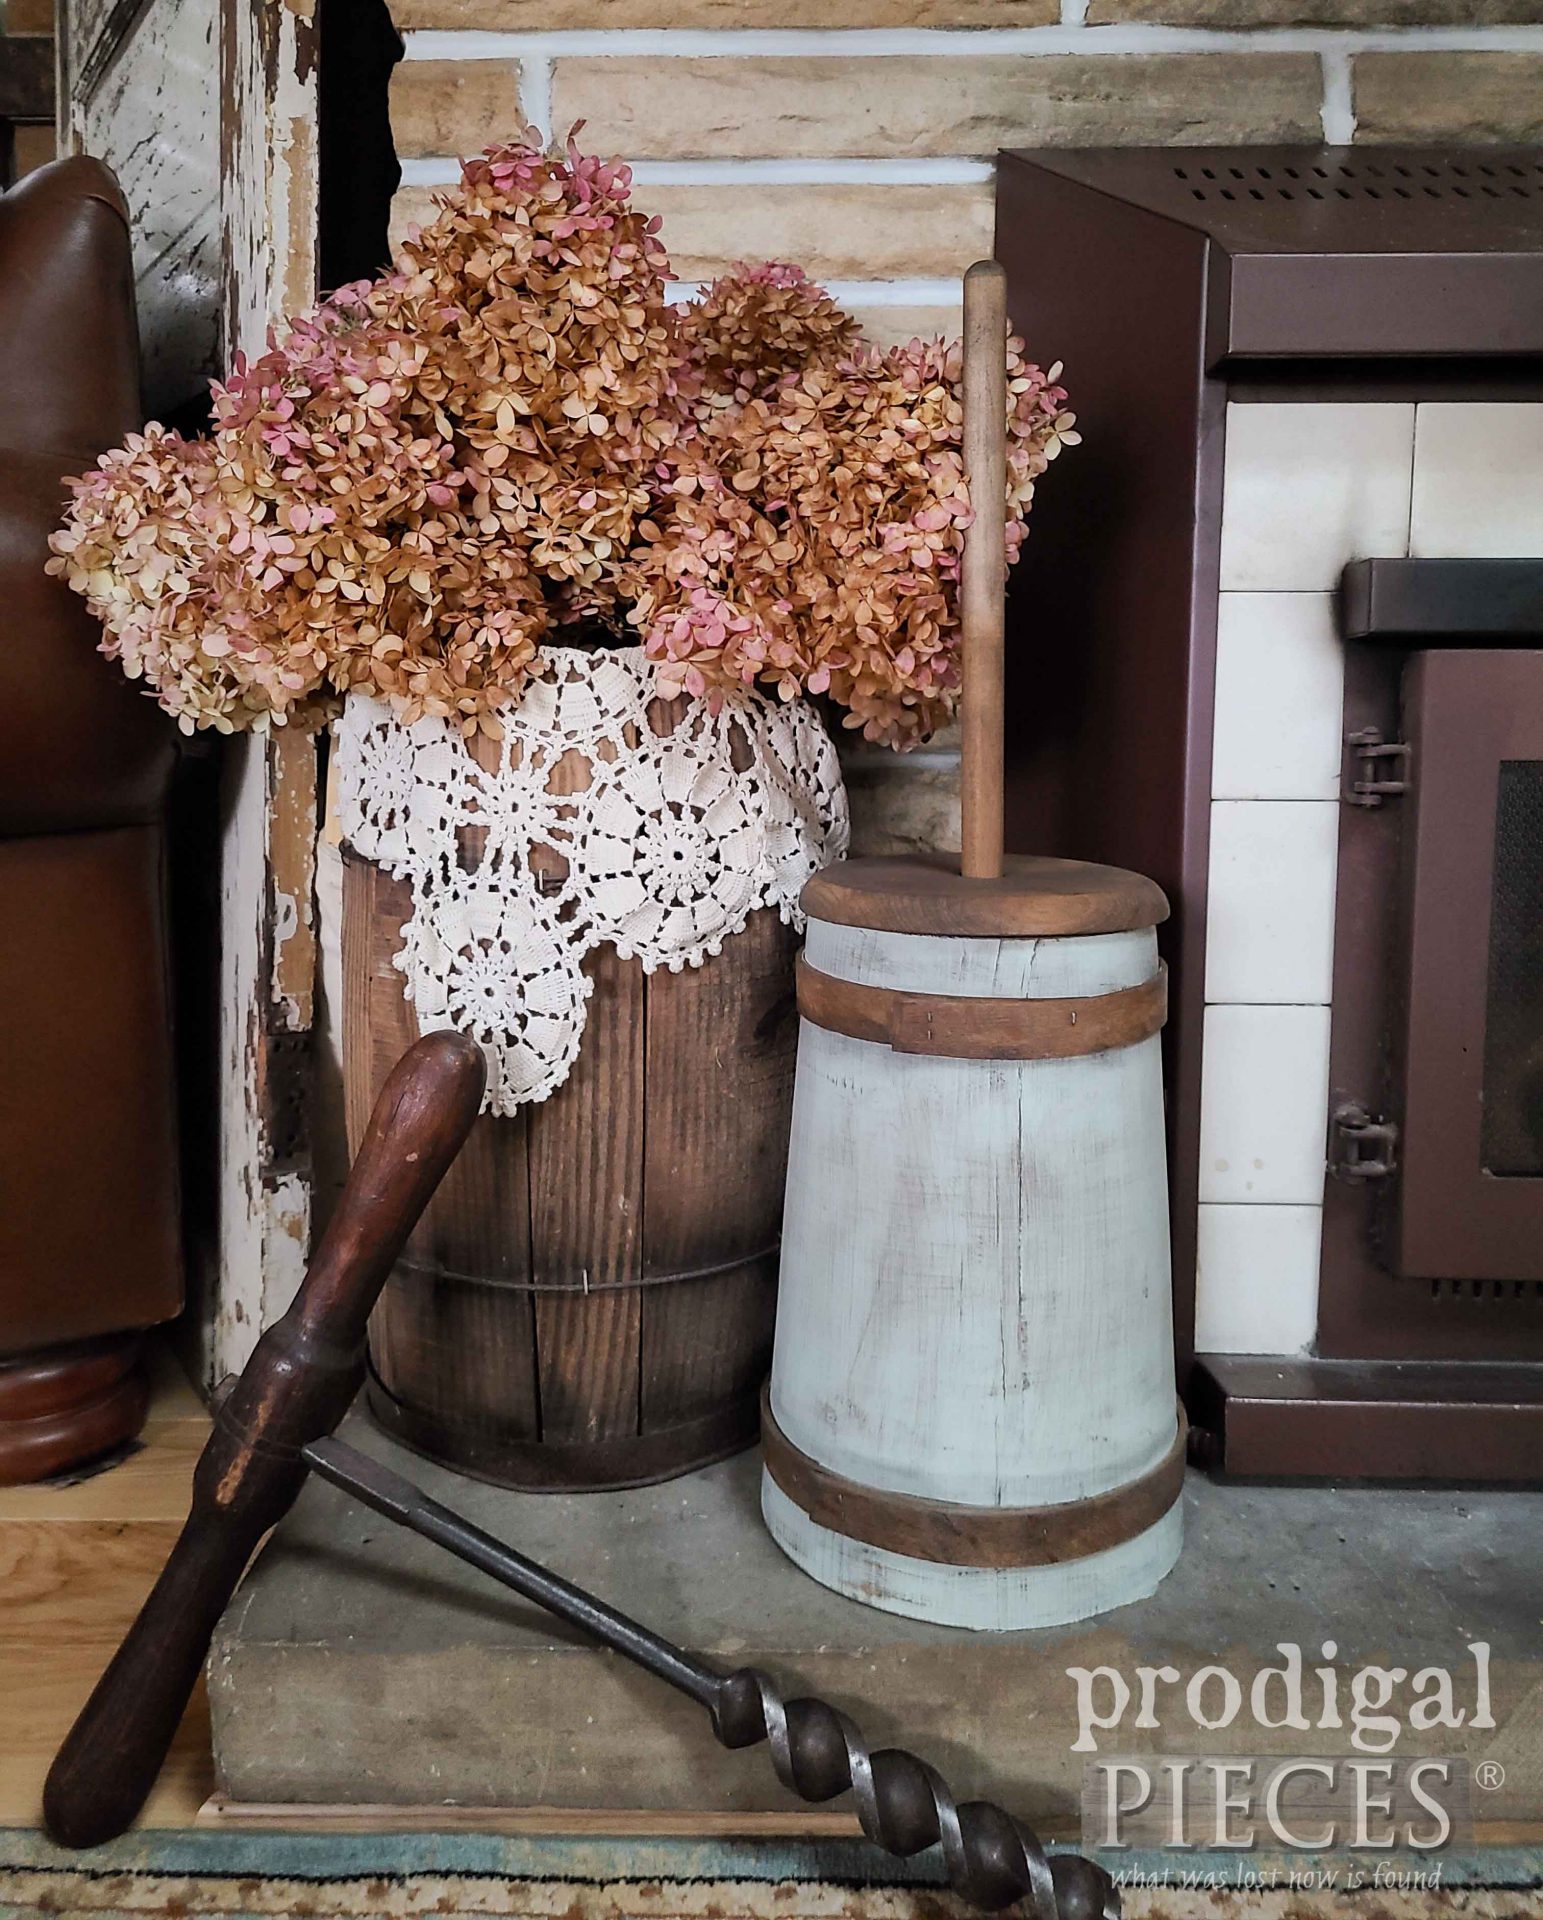 Rustic Farmhouse Butter Churn for Thrifty Farmhouse Makeovers by Larissa of Prodigal Pieces | prodigalpieces.com #prodigalpieces #farmhouse #vintage #diy